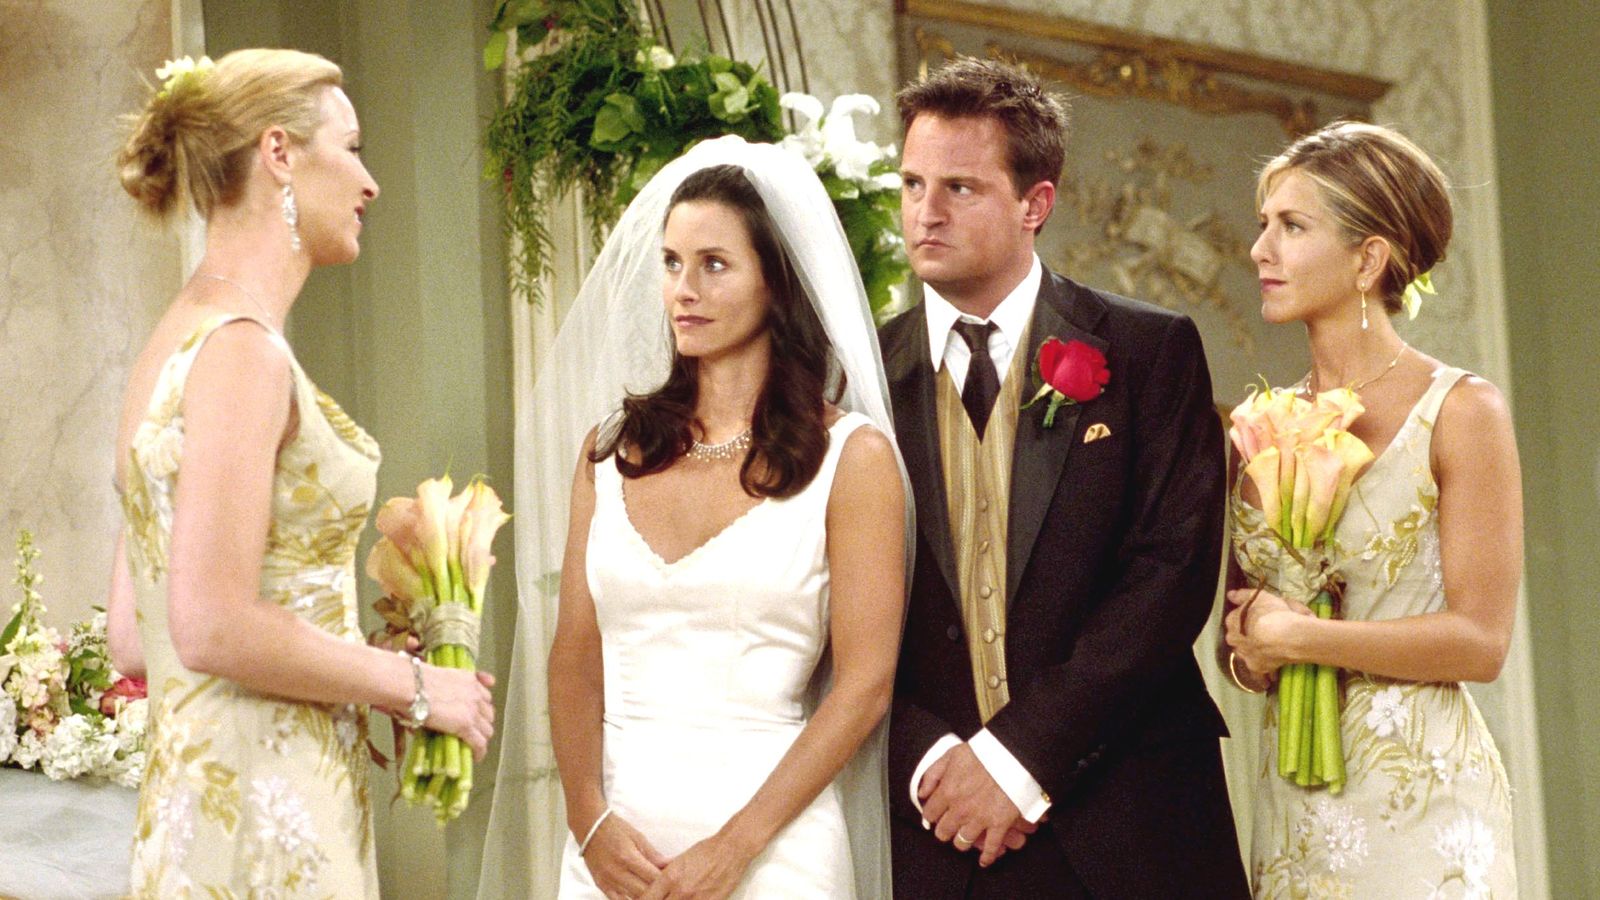 Matthew Perry couldn't go through with Friends scene in which Chandler cheated on Monica, actress says